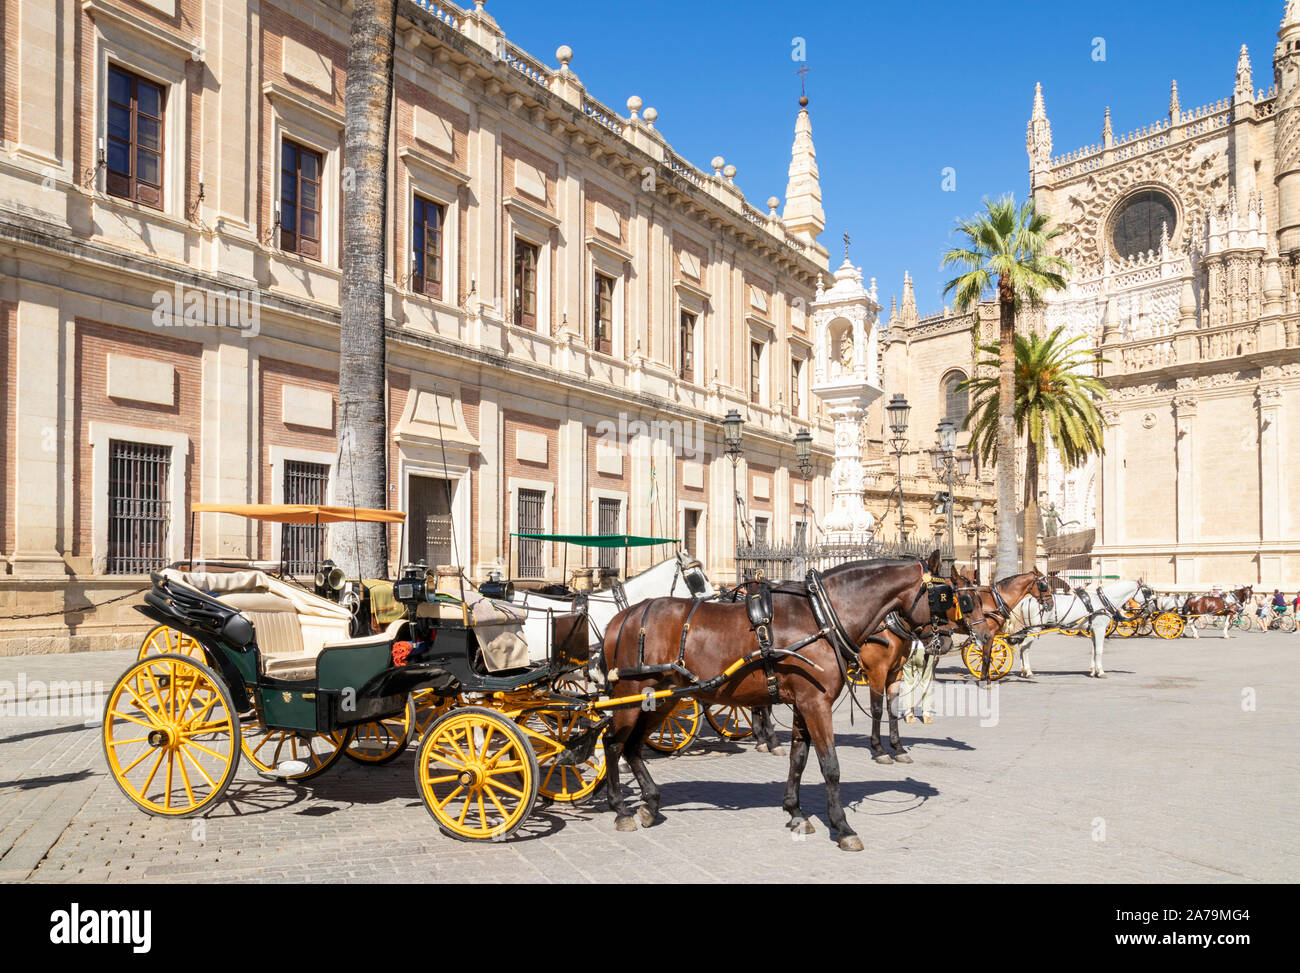 Seville carriage rides offered outside Seville cathedral and the General Archive of the Indies building Calle Miguel Mañara Seville Spain EU Europe Stock Photo